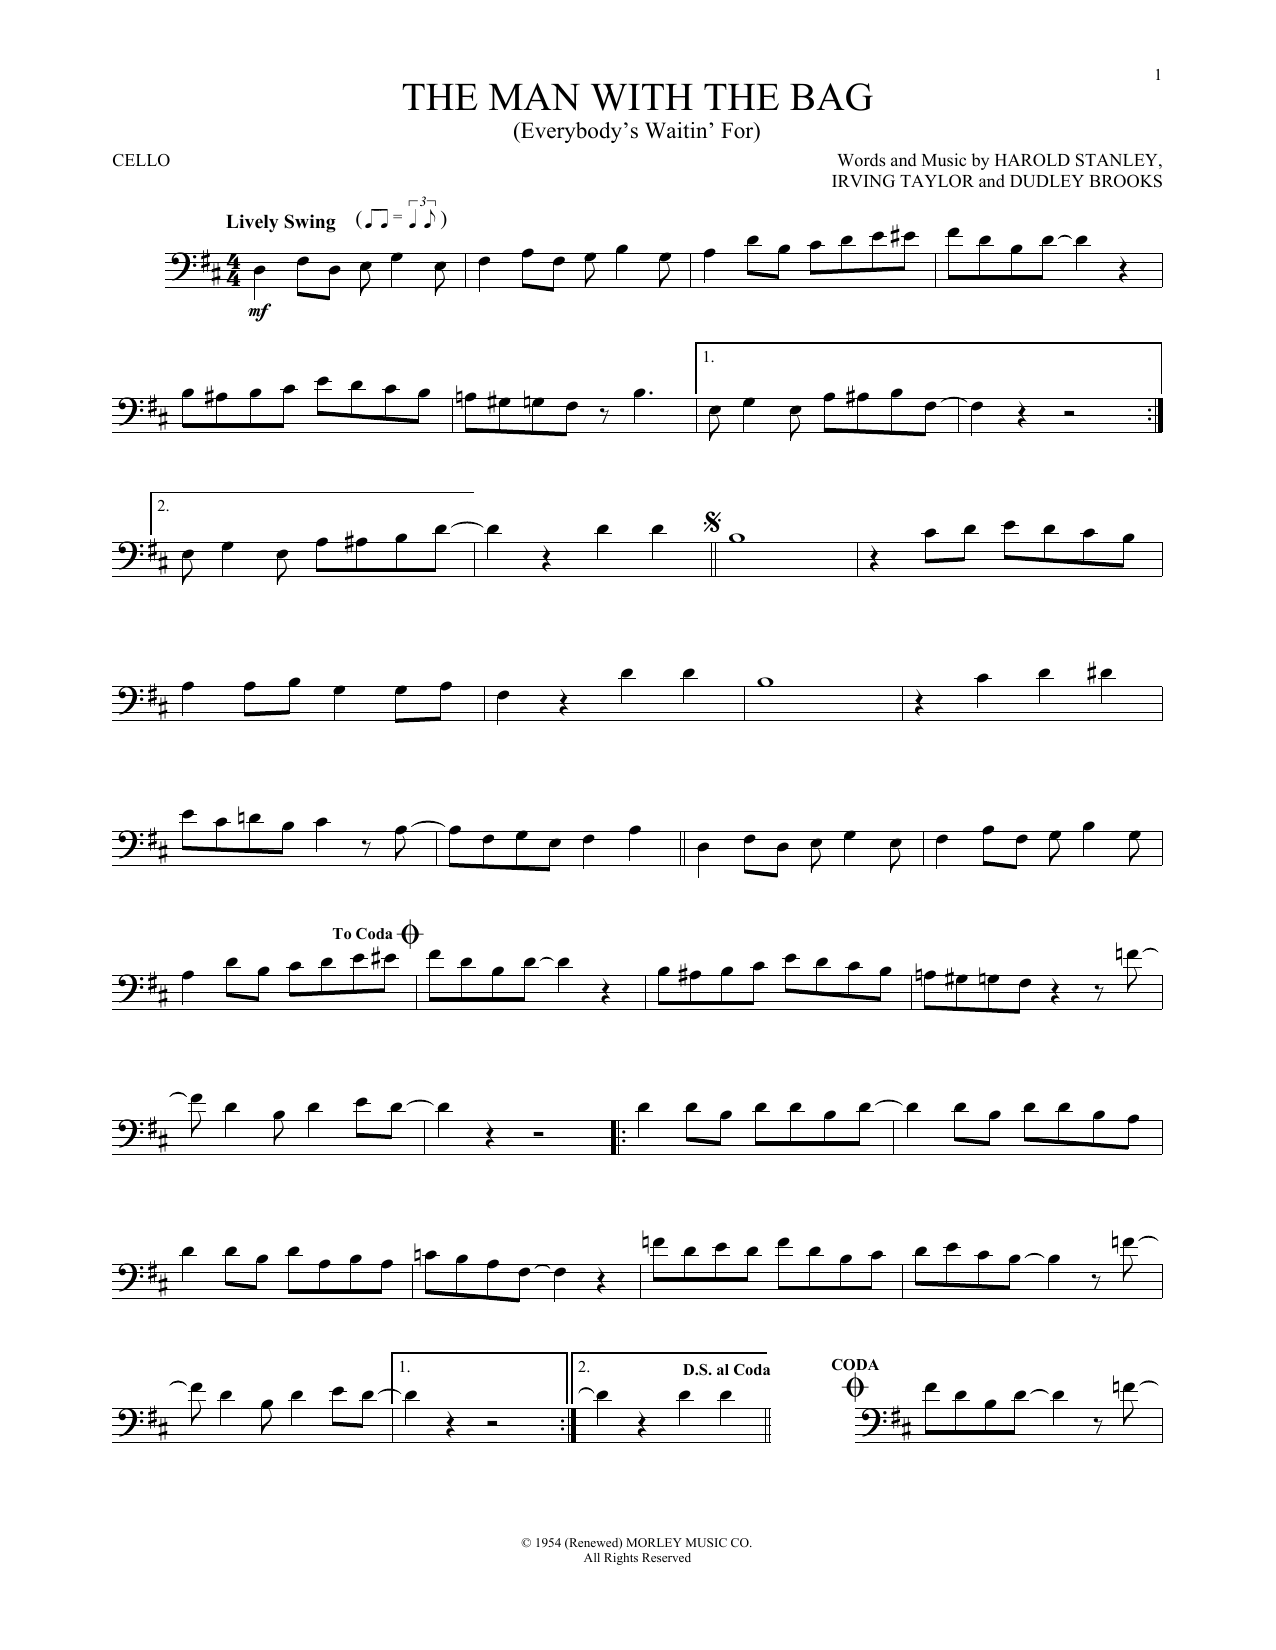 Irving Taylor (Everybody's Waitin' For) The Man With The Bag sheet music notes and chords. Download Printable PDF.